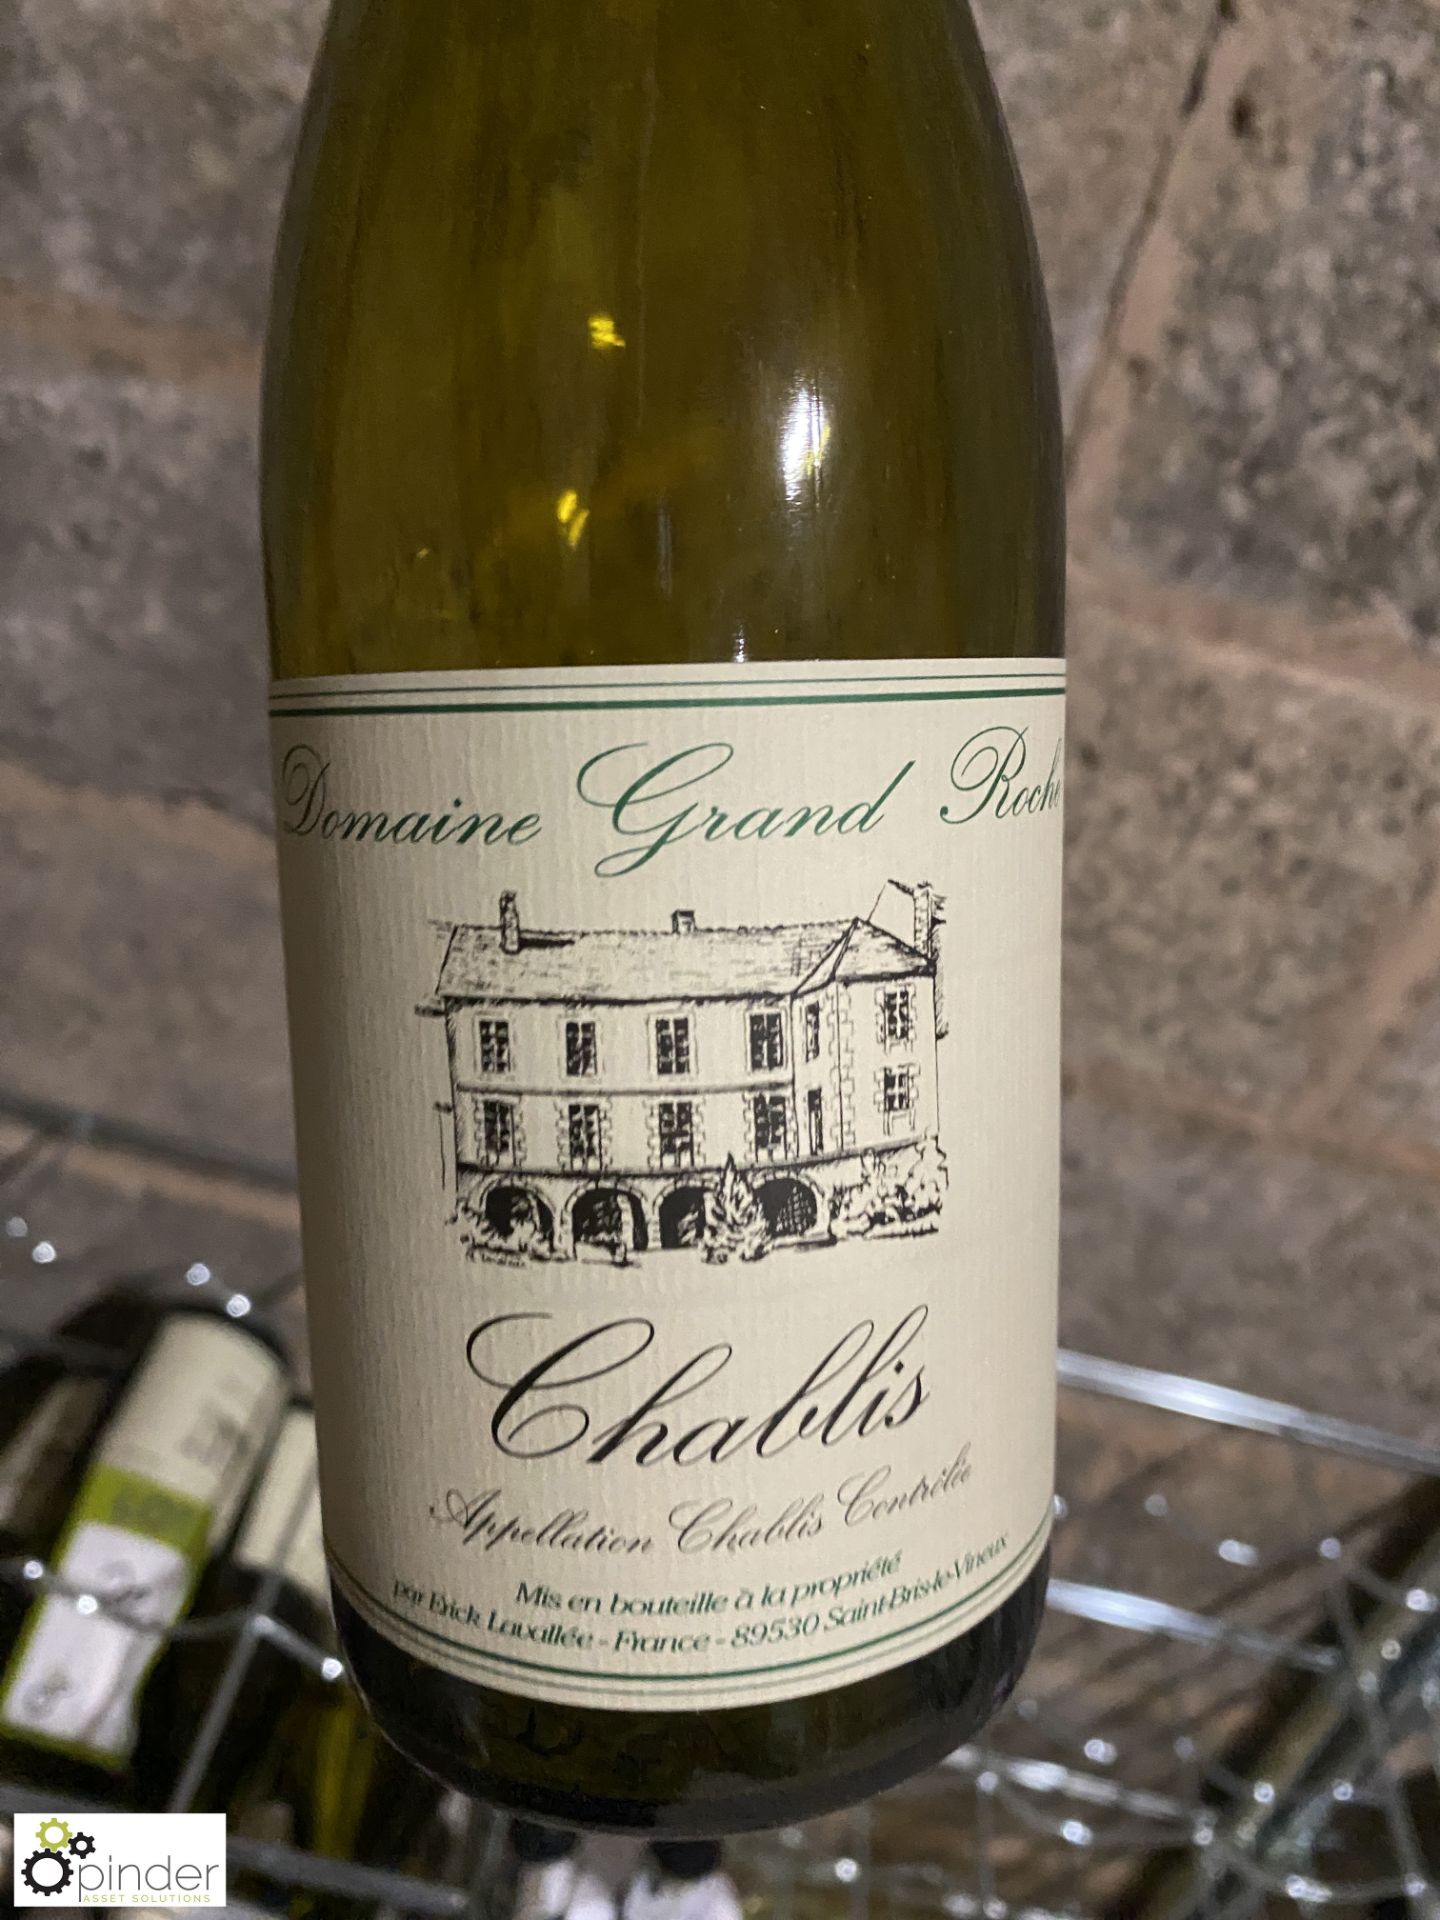 5 bottles Domaine Grand Roche Chablis and 10 bottles Domaine Jean Goolley and Fils Chablis Premier - Image 2 of 6